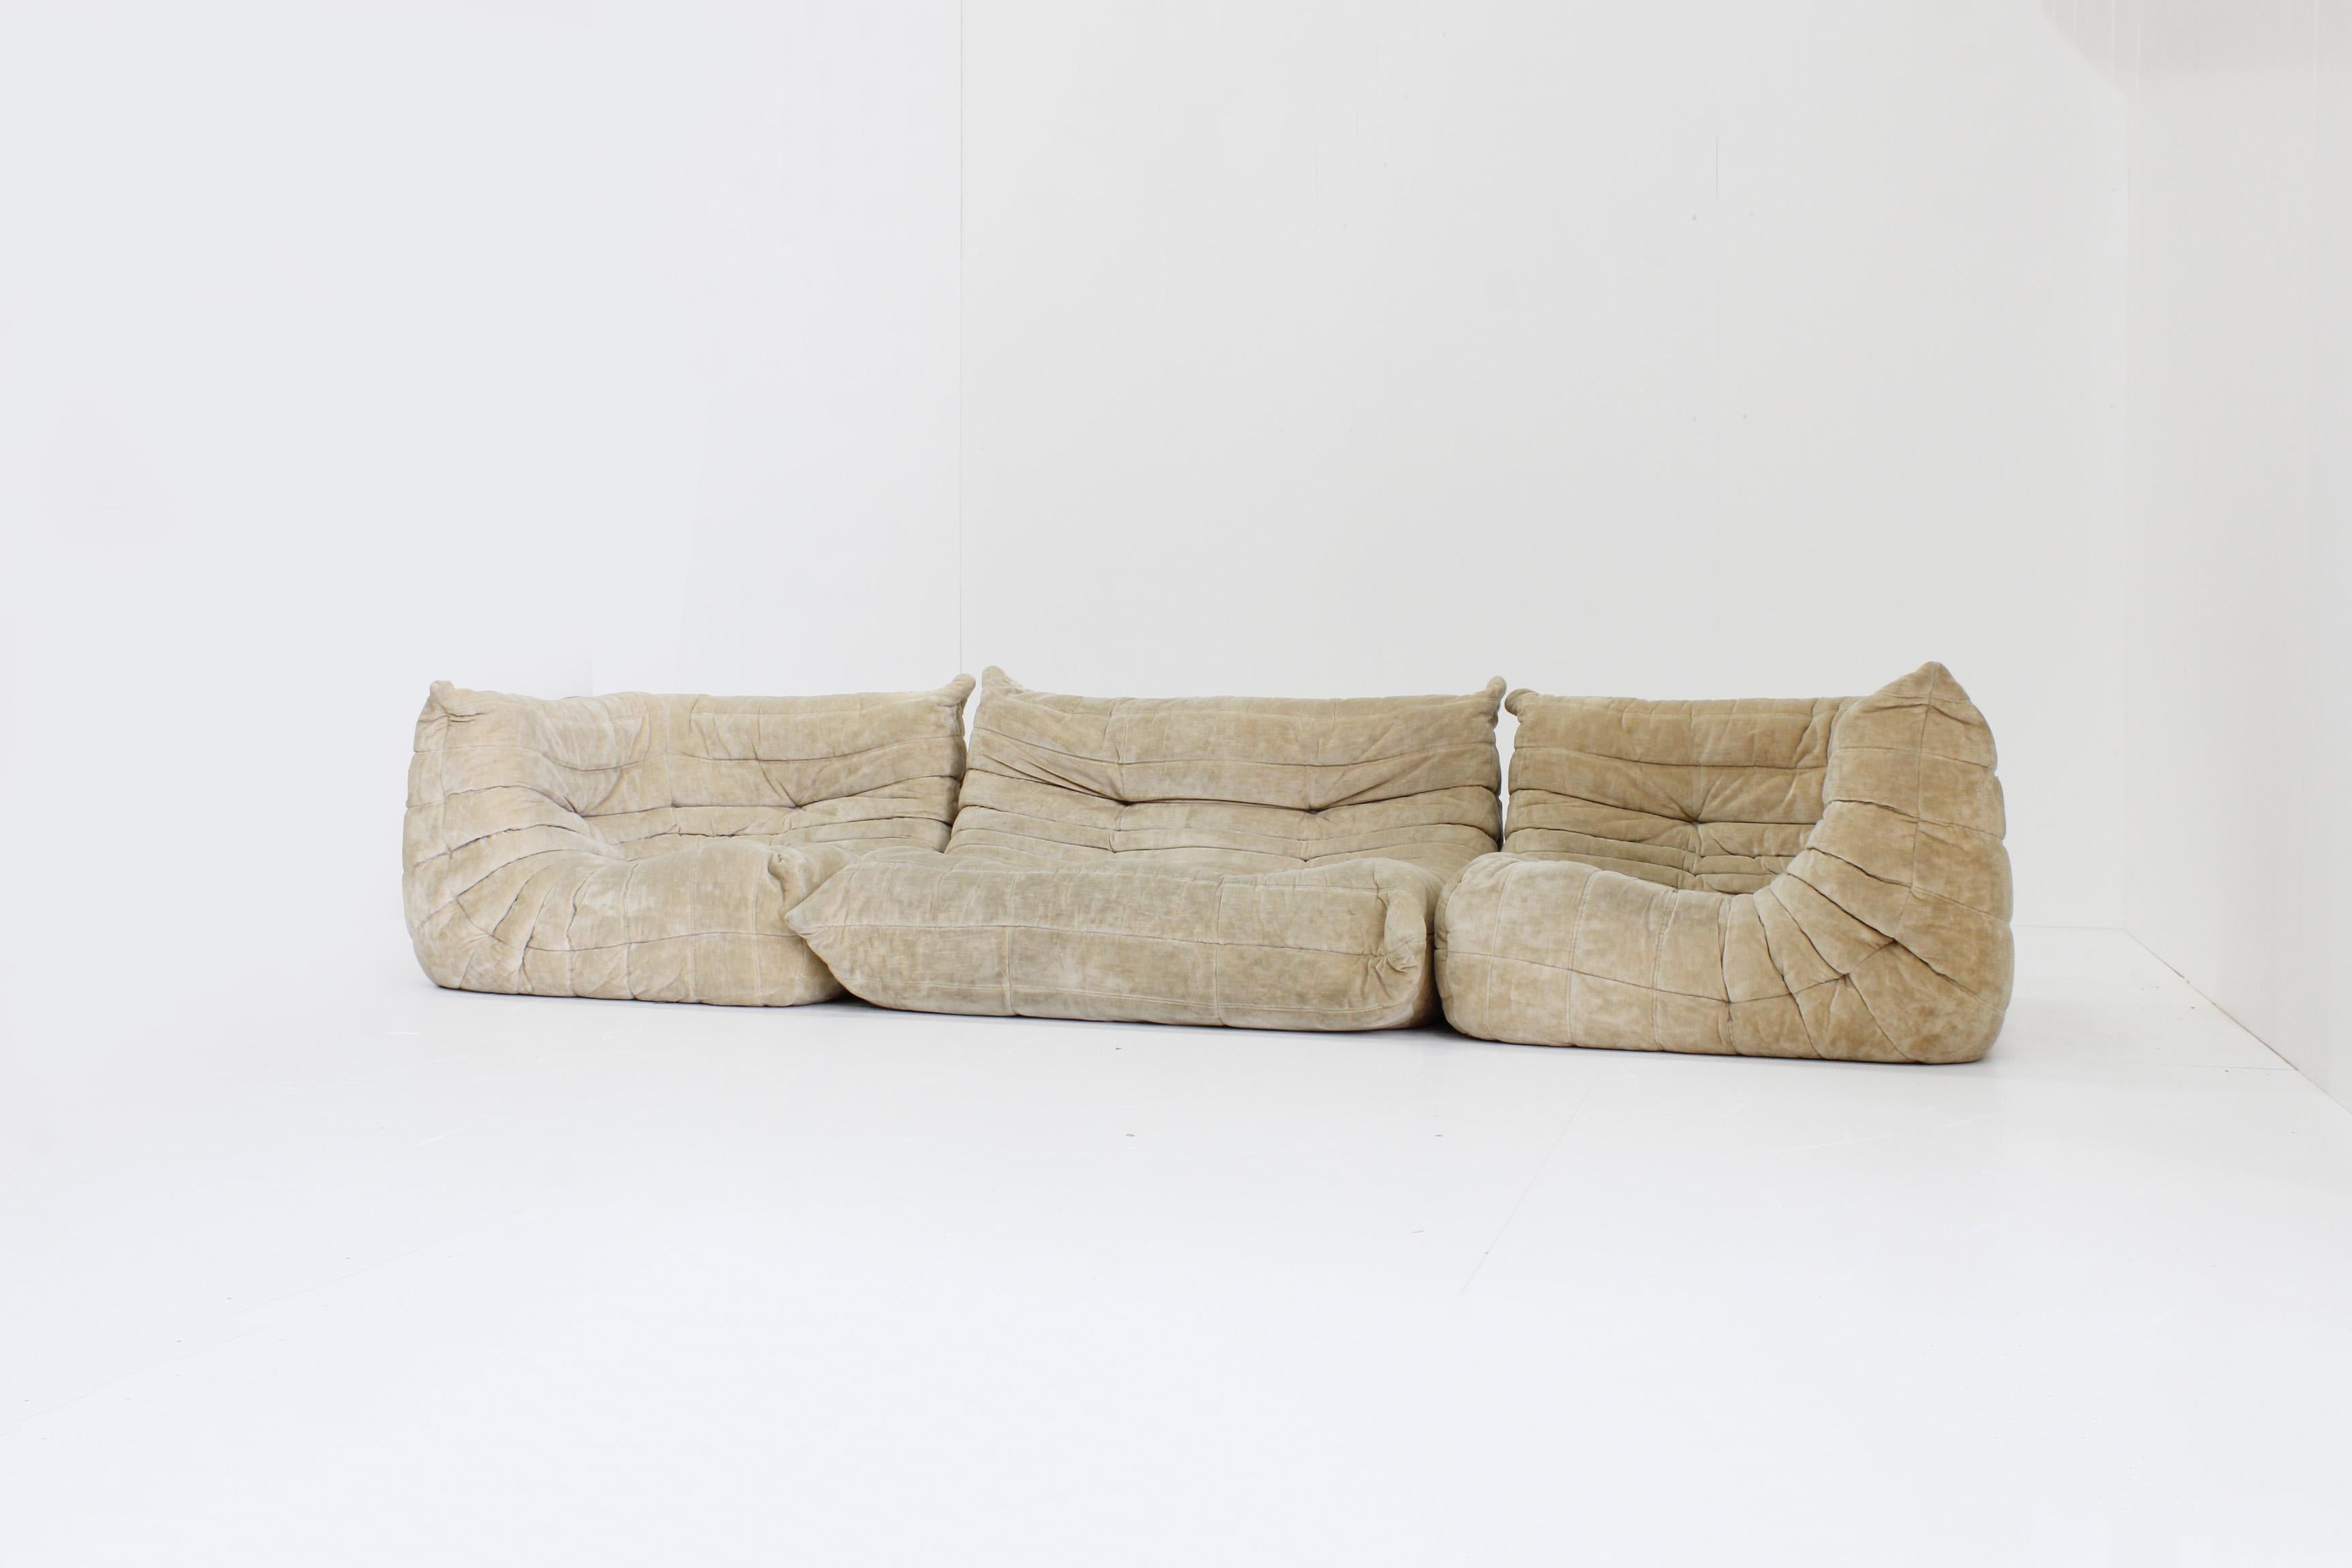 Original vintage Togo sofa set by Ligne Roset designed by Michel Ducaroy. This is an original set consisting of a 2 seater sofa and 2 corner pieces in beige velvet fabric.
 
The sofa is made in 1983 by Ligne Roset with a design of Michel Ducaroy.